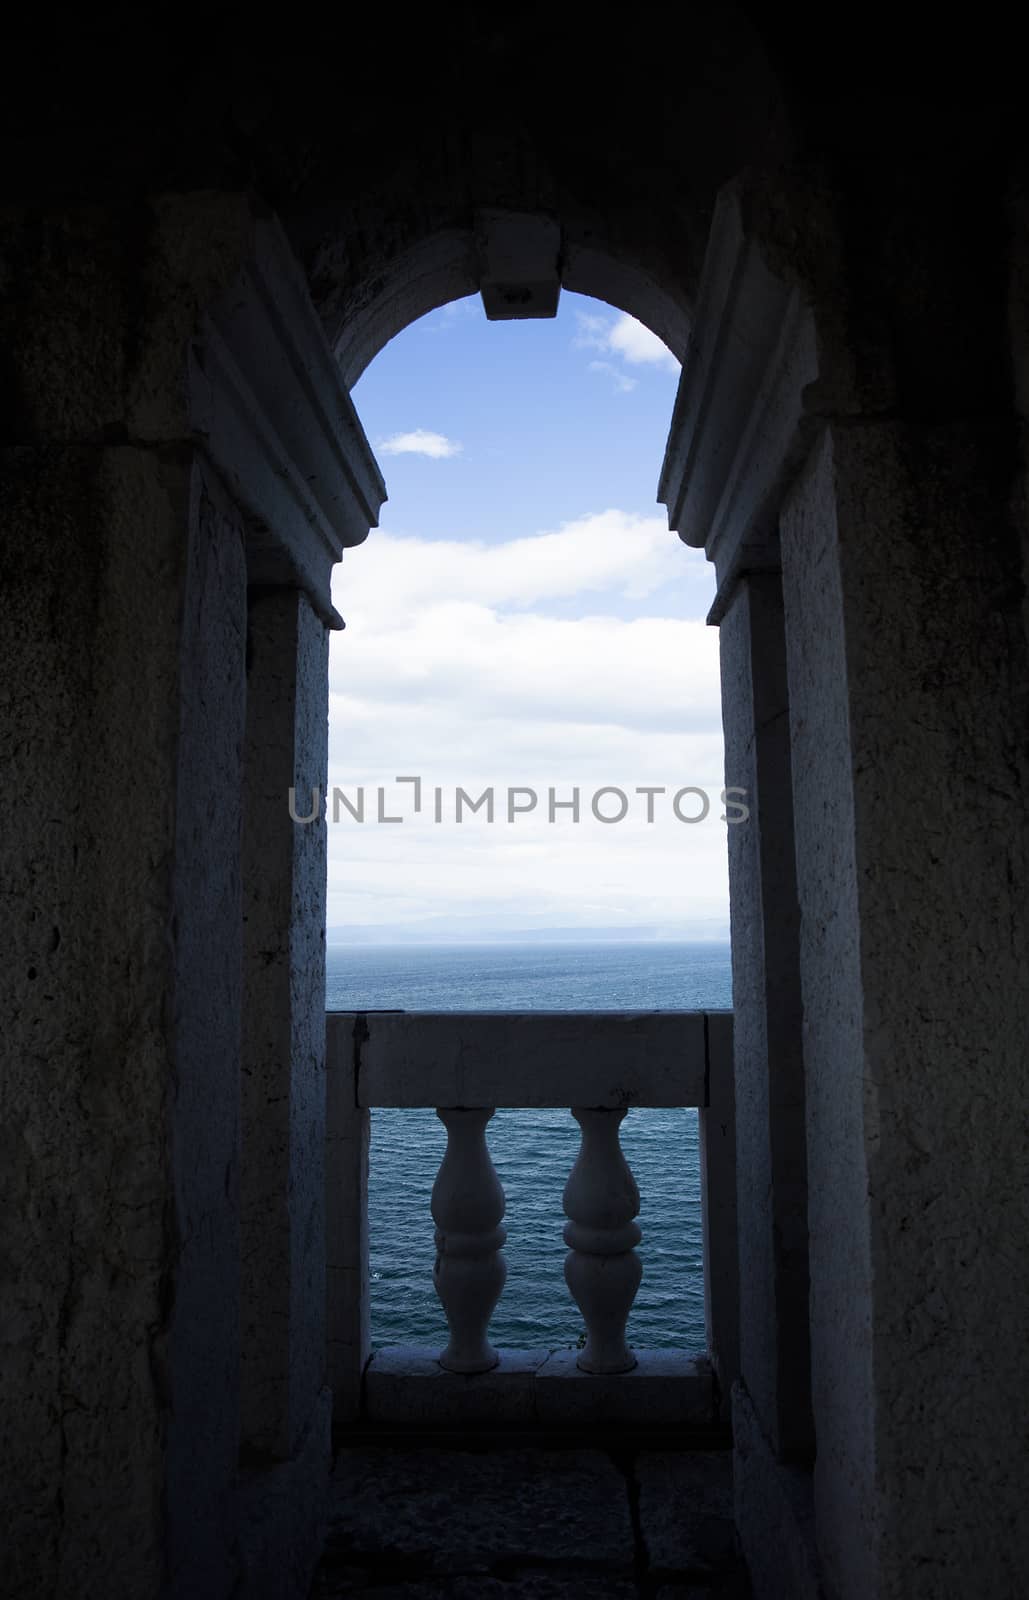 Ocean, through archway by photosampler